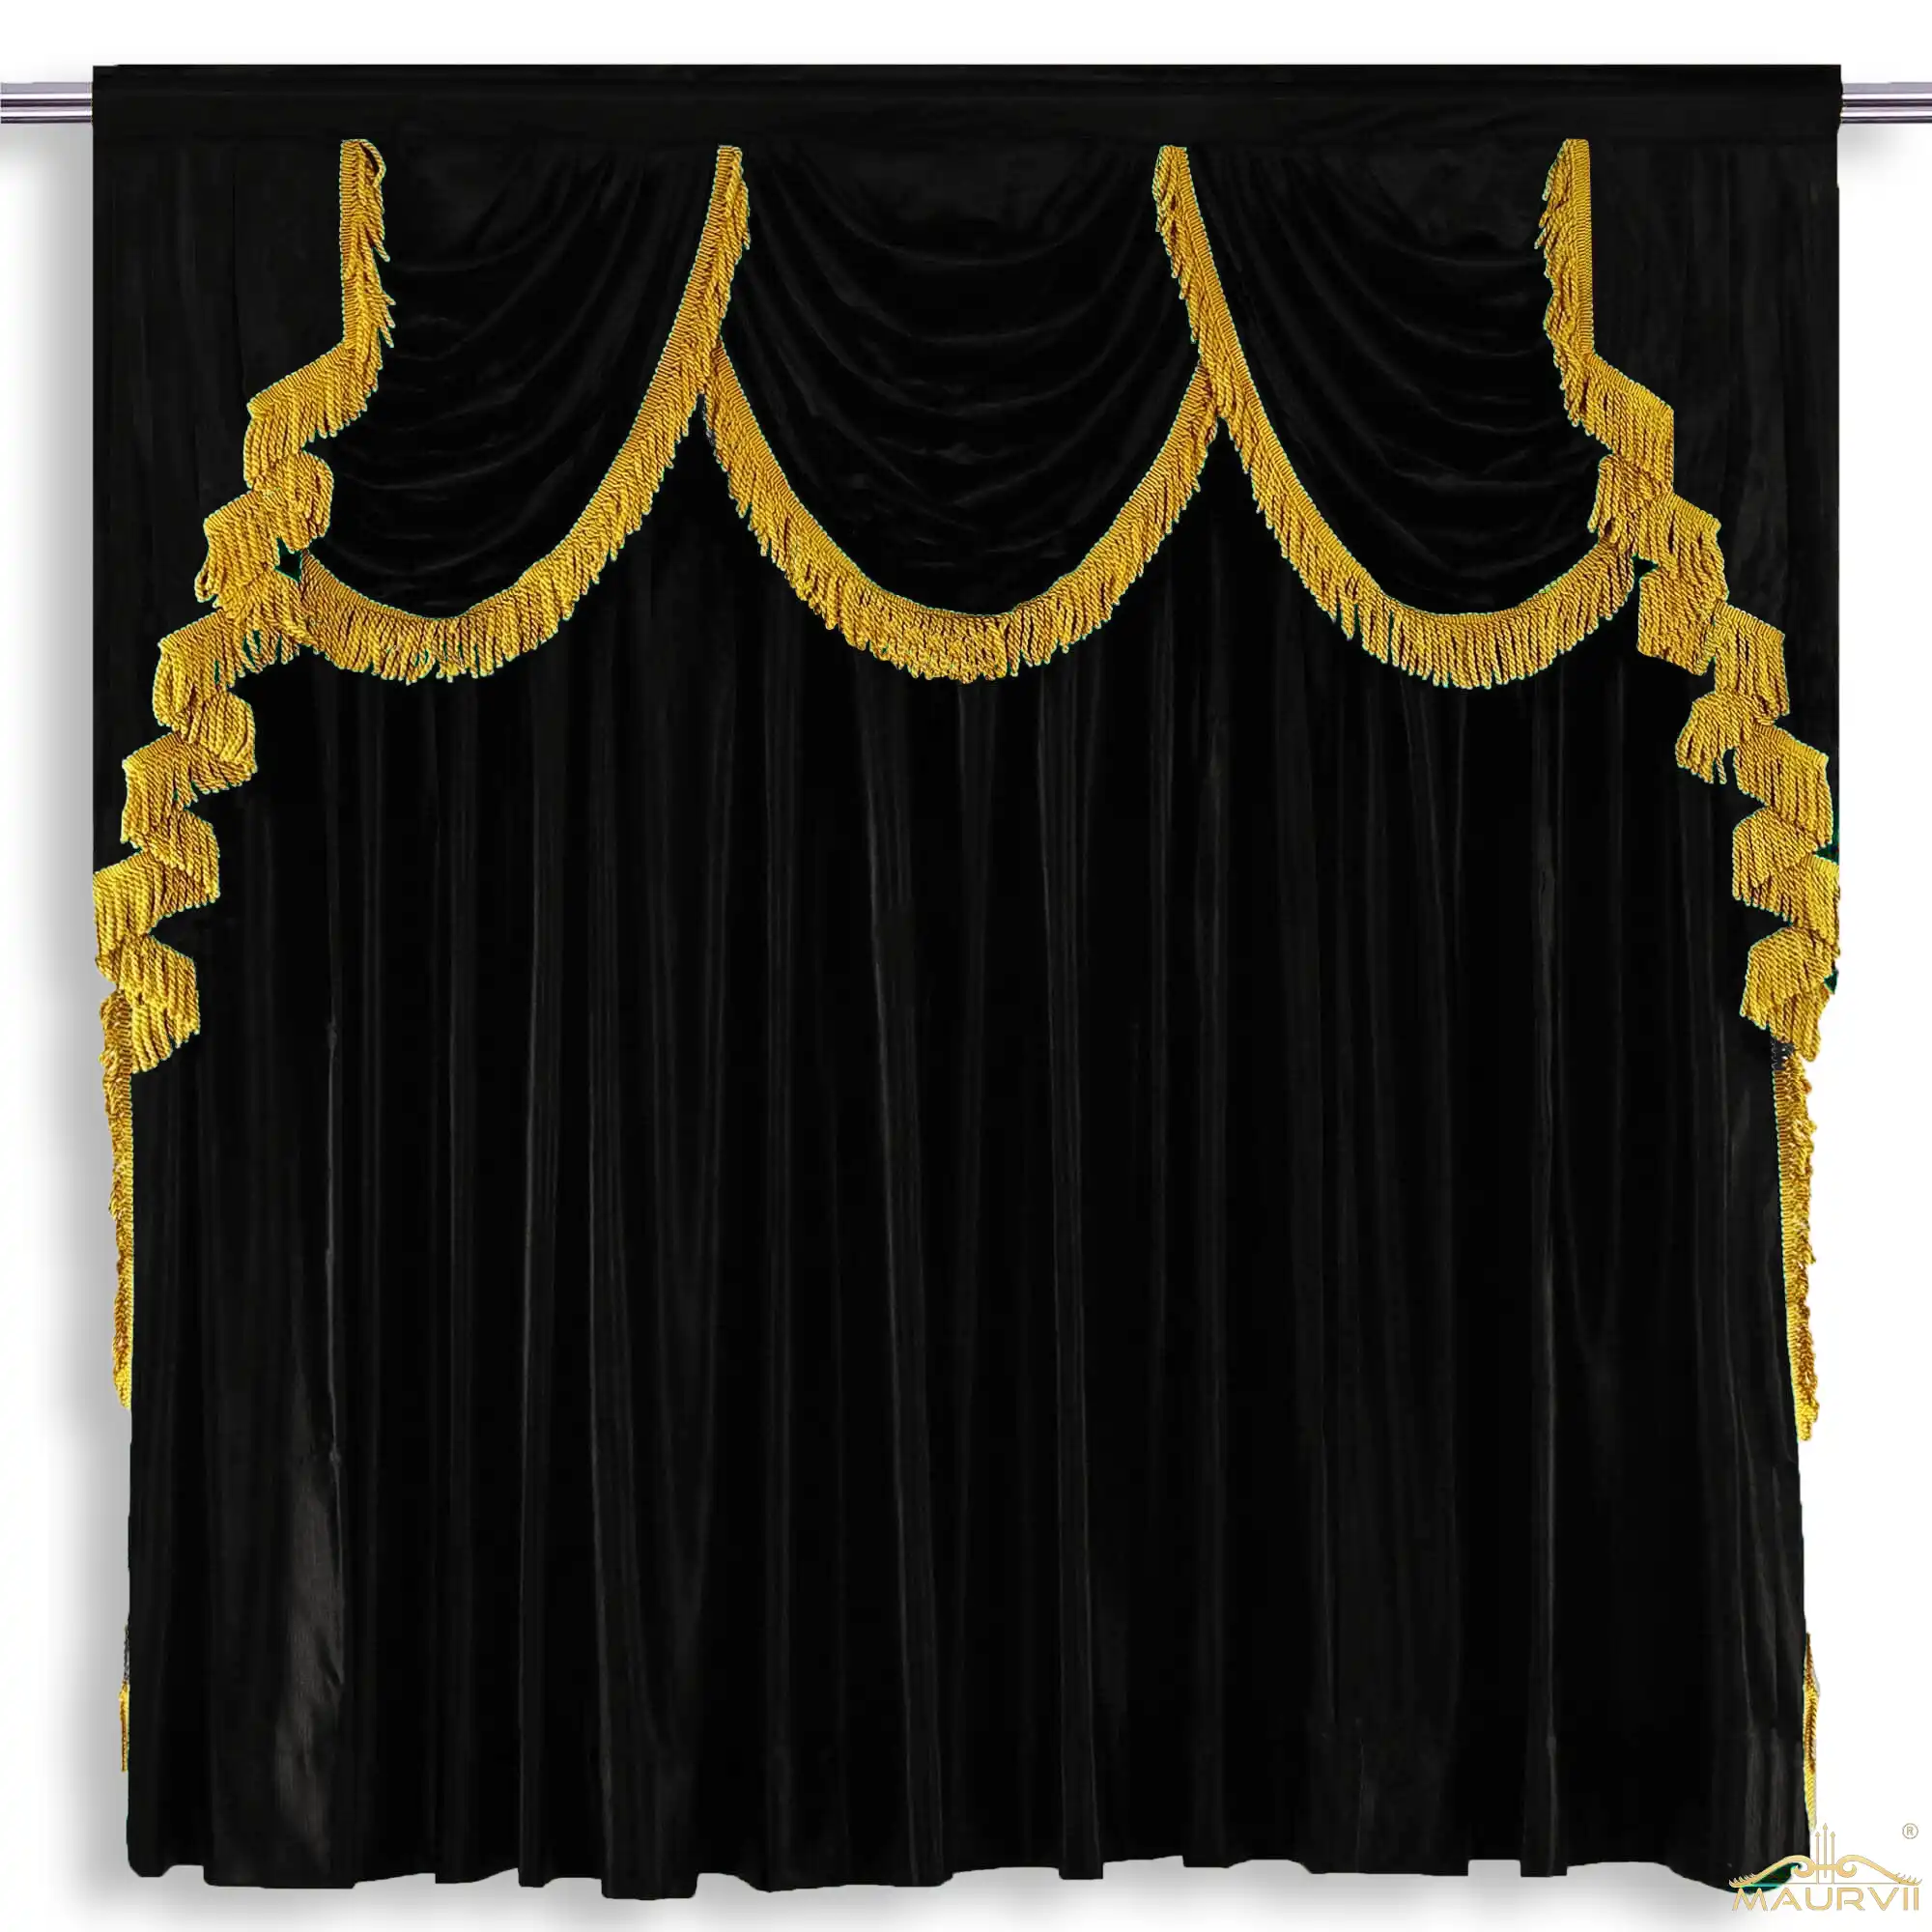 Stage curtains with golden fringe